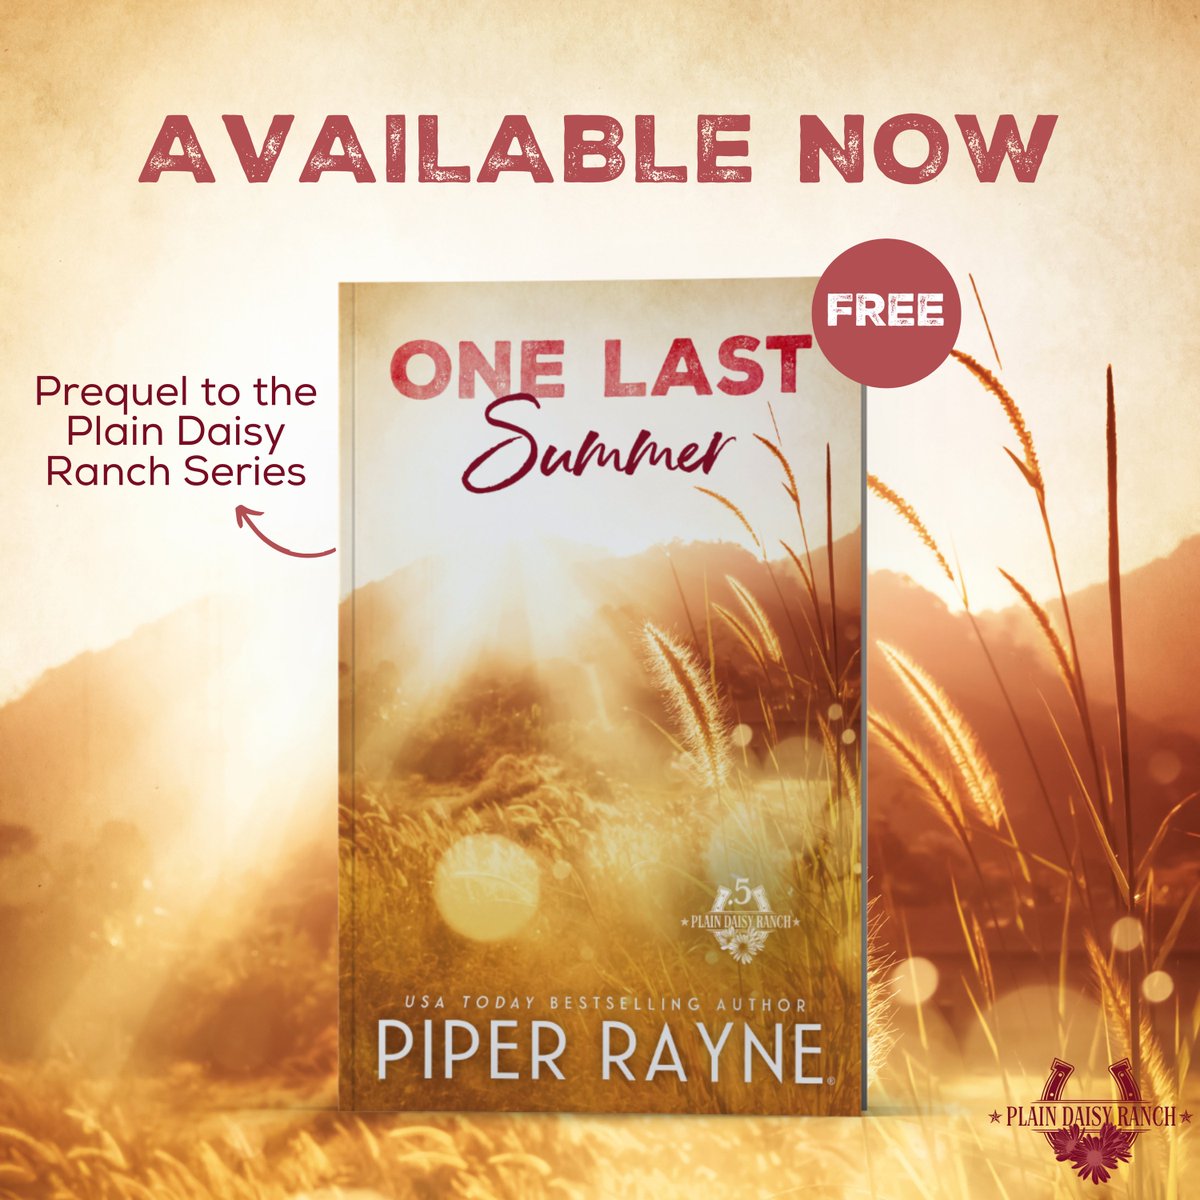 SURPRISE FREE EBOOK RELEASE! ONE LAST SUMMER is available for FREE! This is the prequel to our May 14th release, THE ONE I LEFT BEHIND (Plain Daisy Ranch #1) and follows Gillian and Ben the summer before he leaves for college on a football scholarship. books2read.com/ols